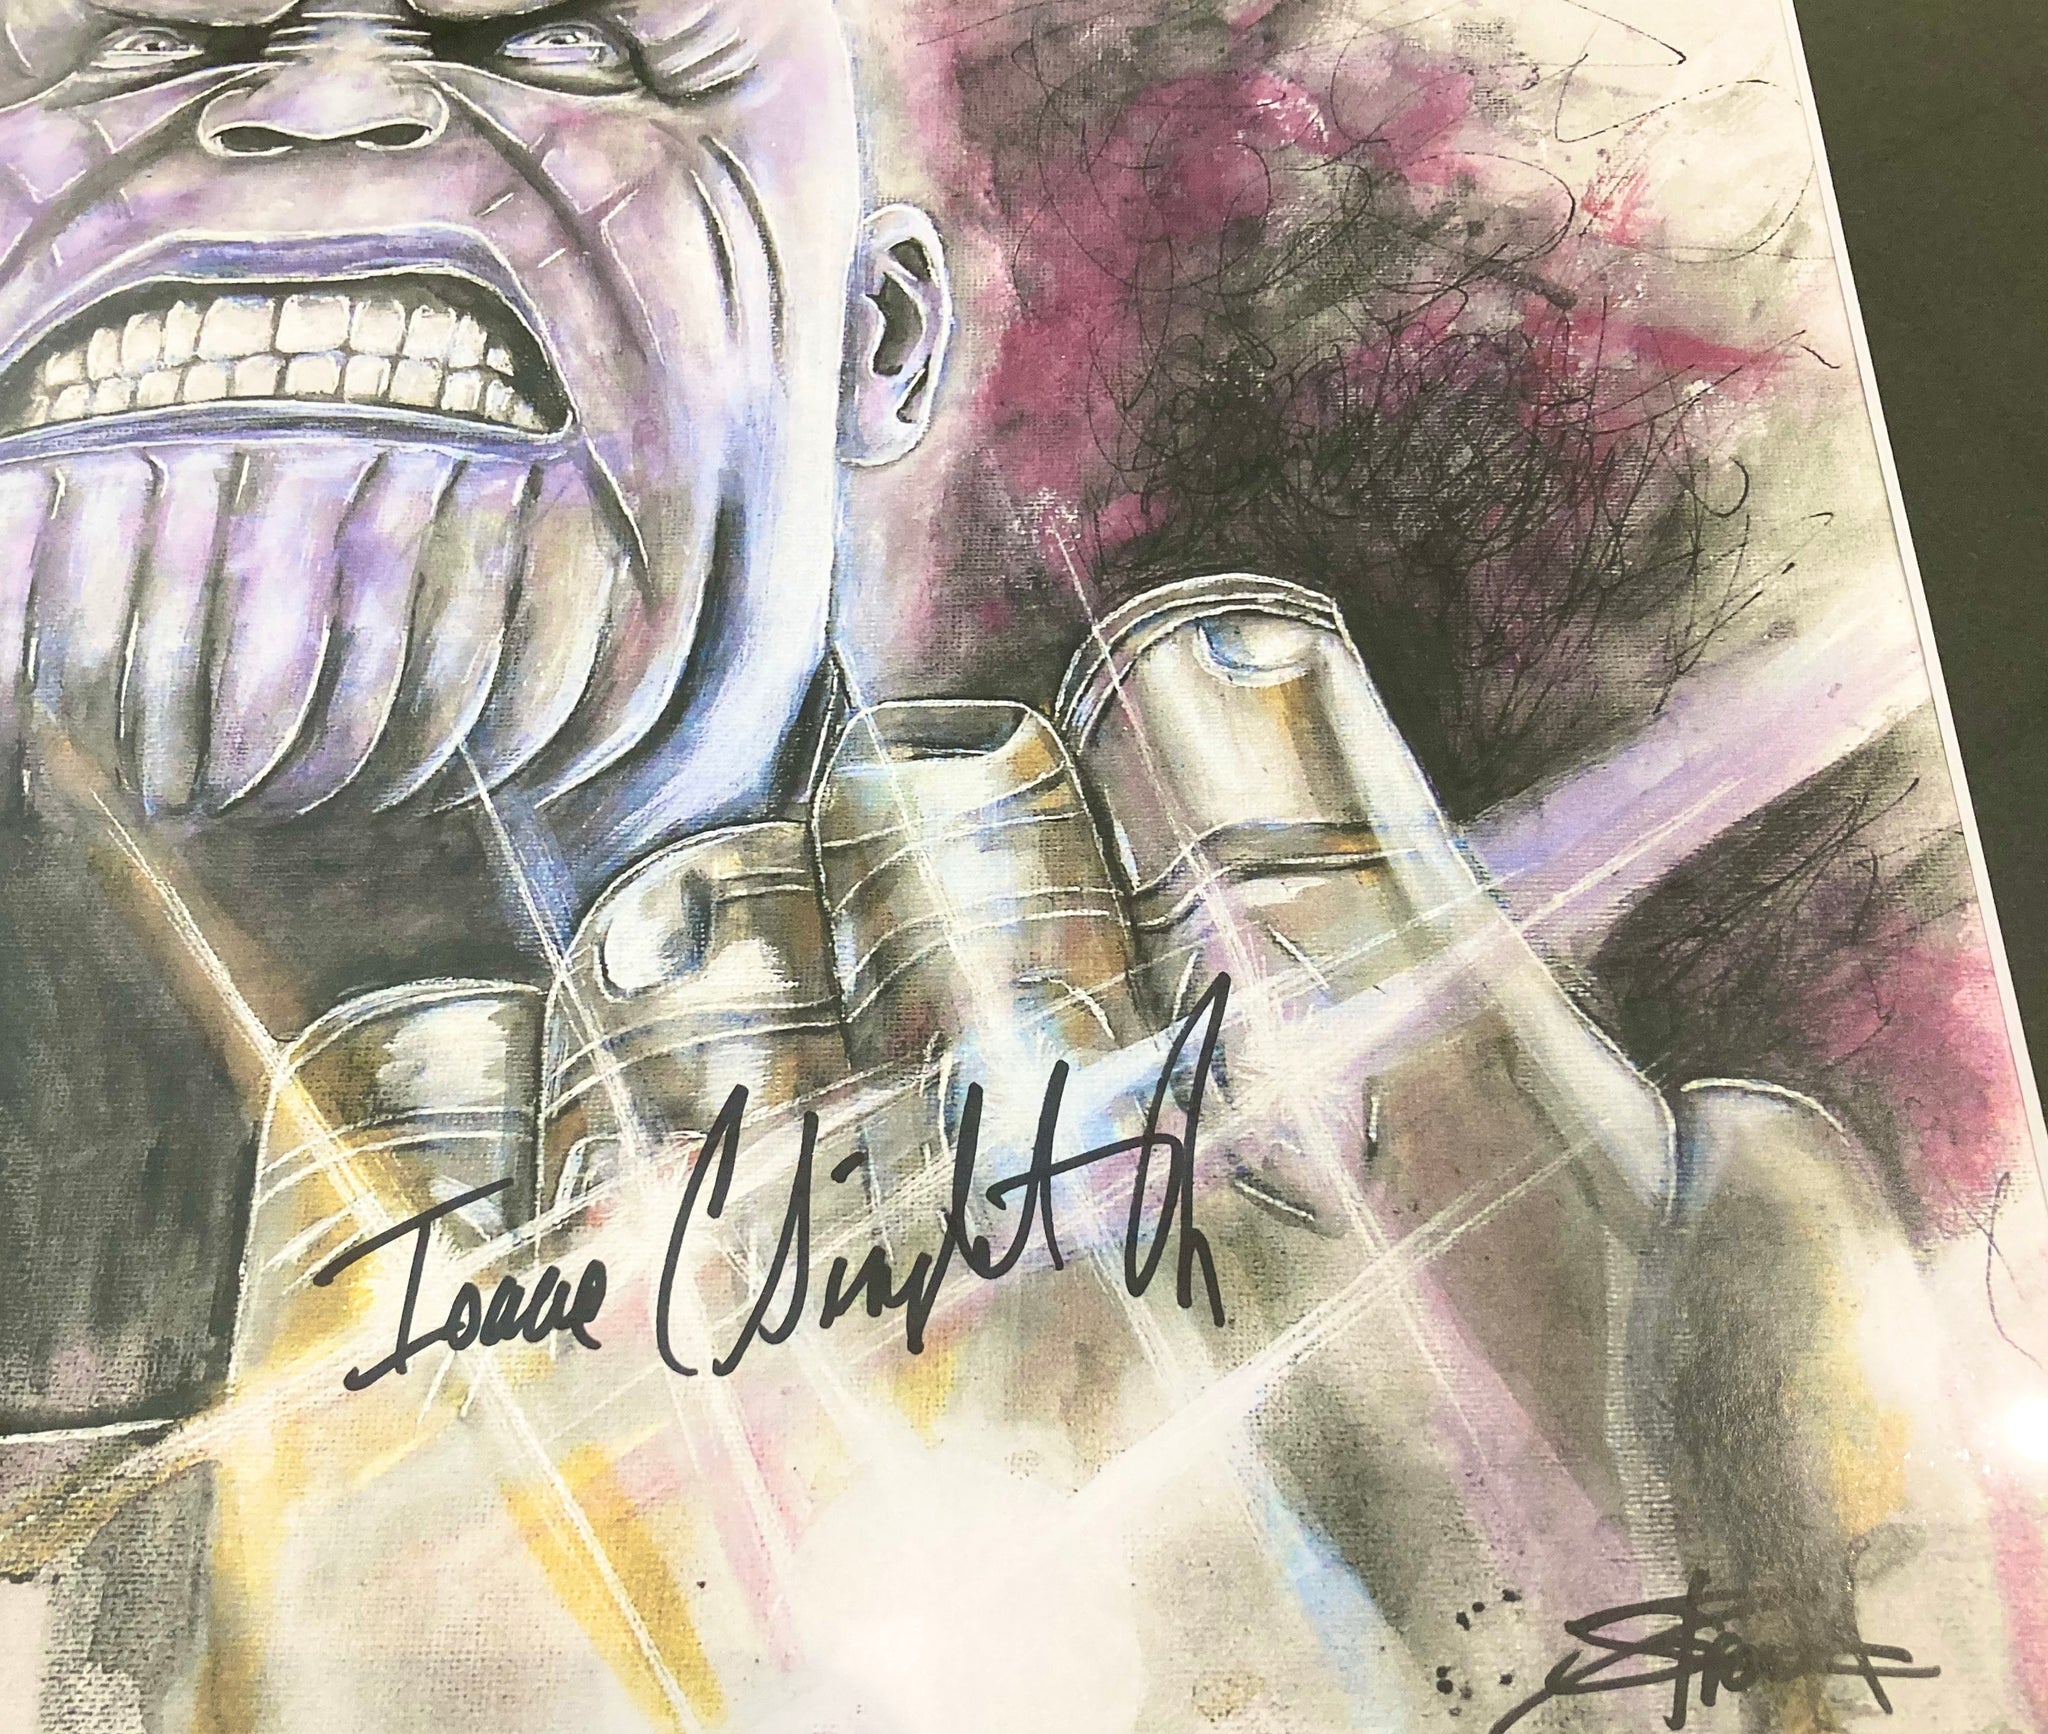 Marvel Thanos Isaac C. Singleton Autographed Print with Triple Layer Authenticity